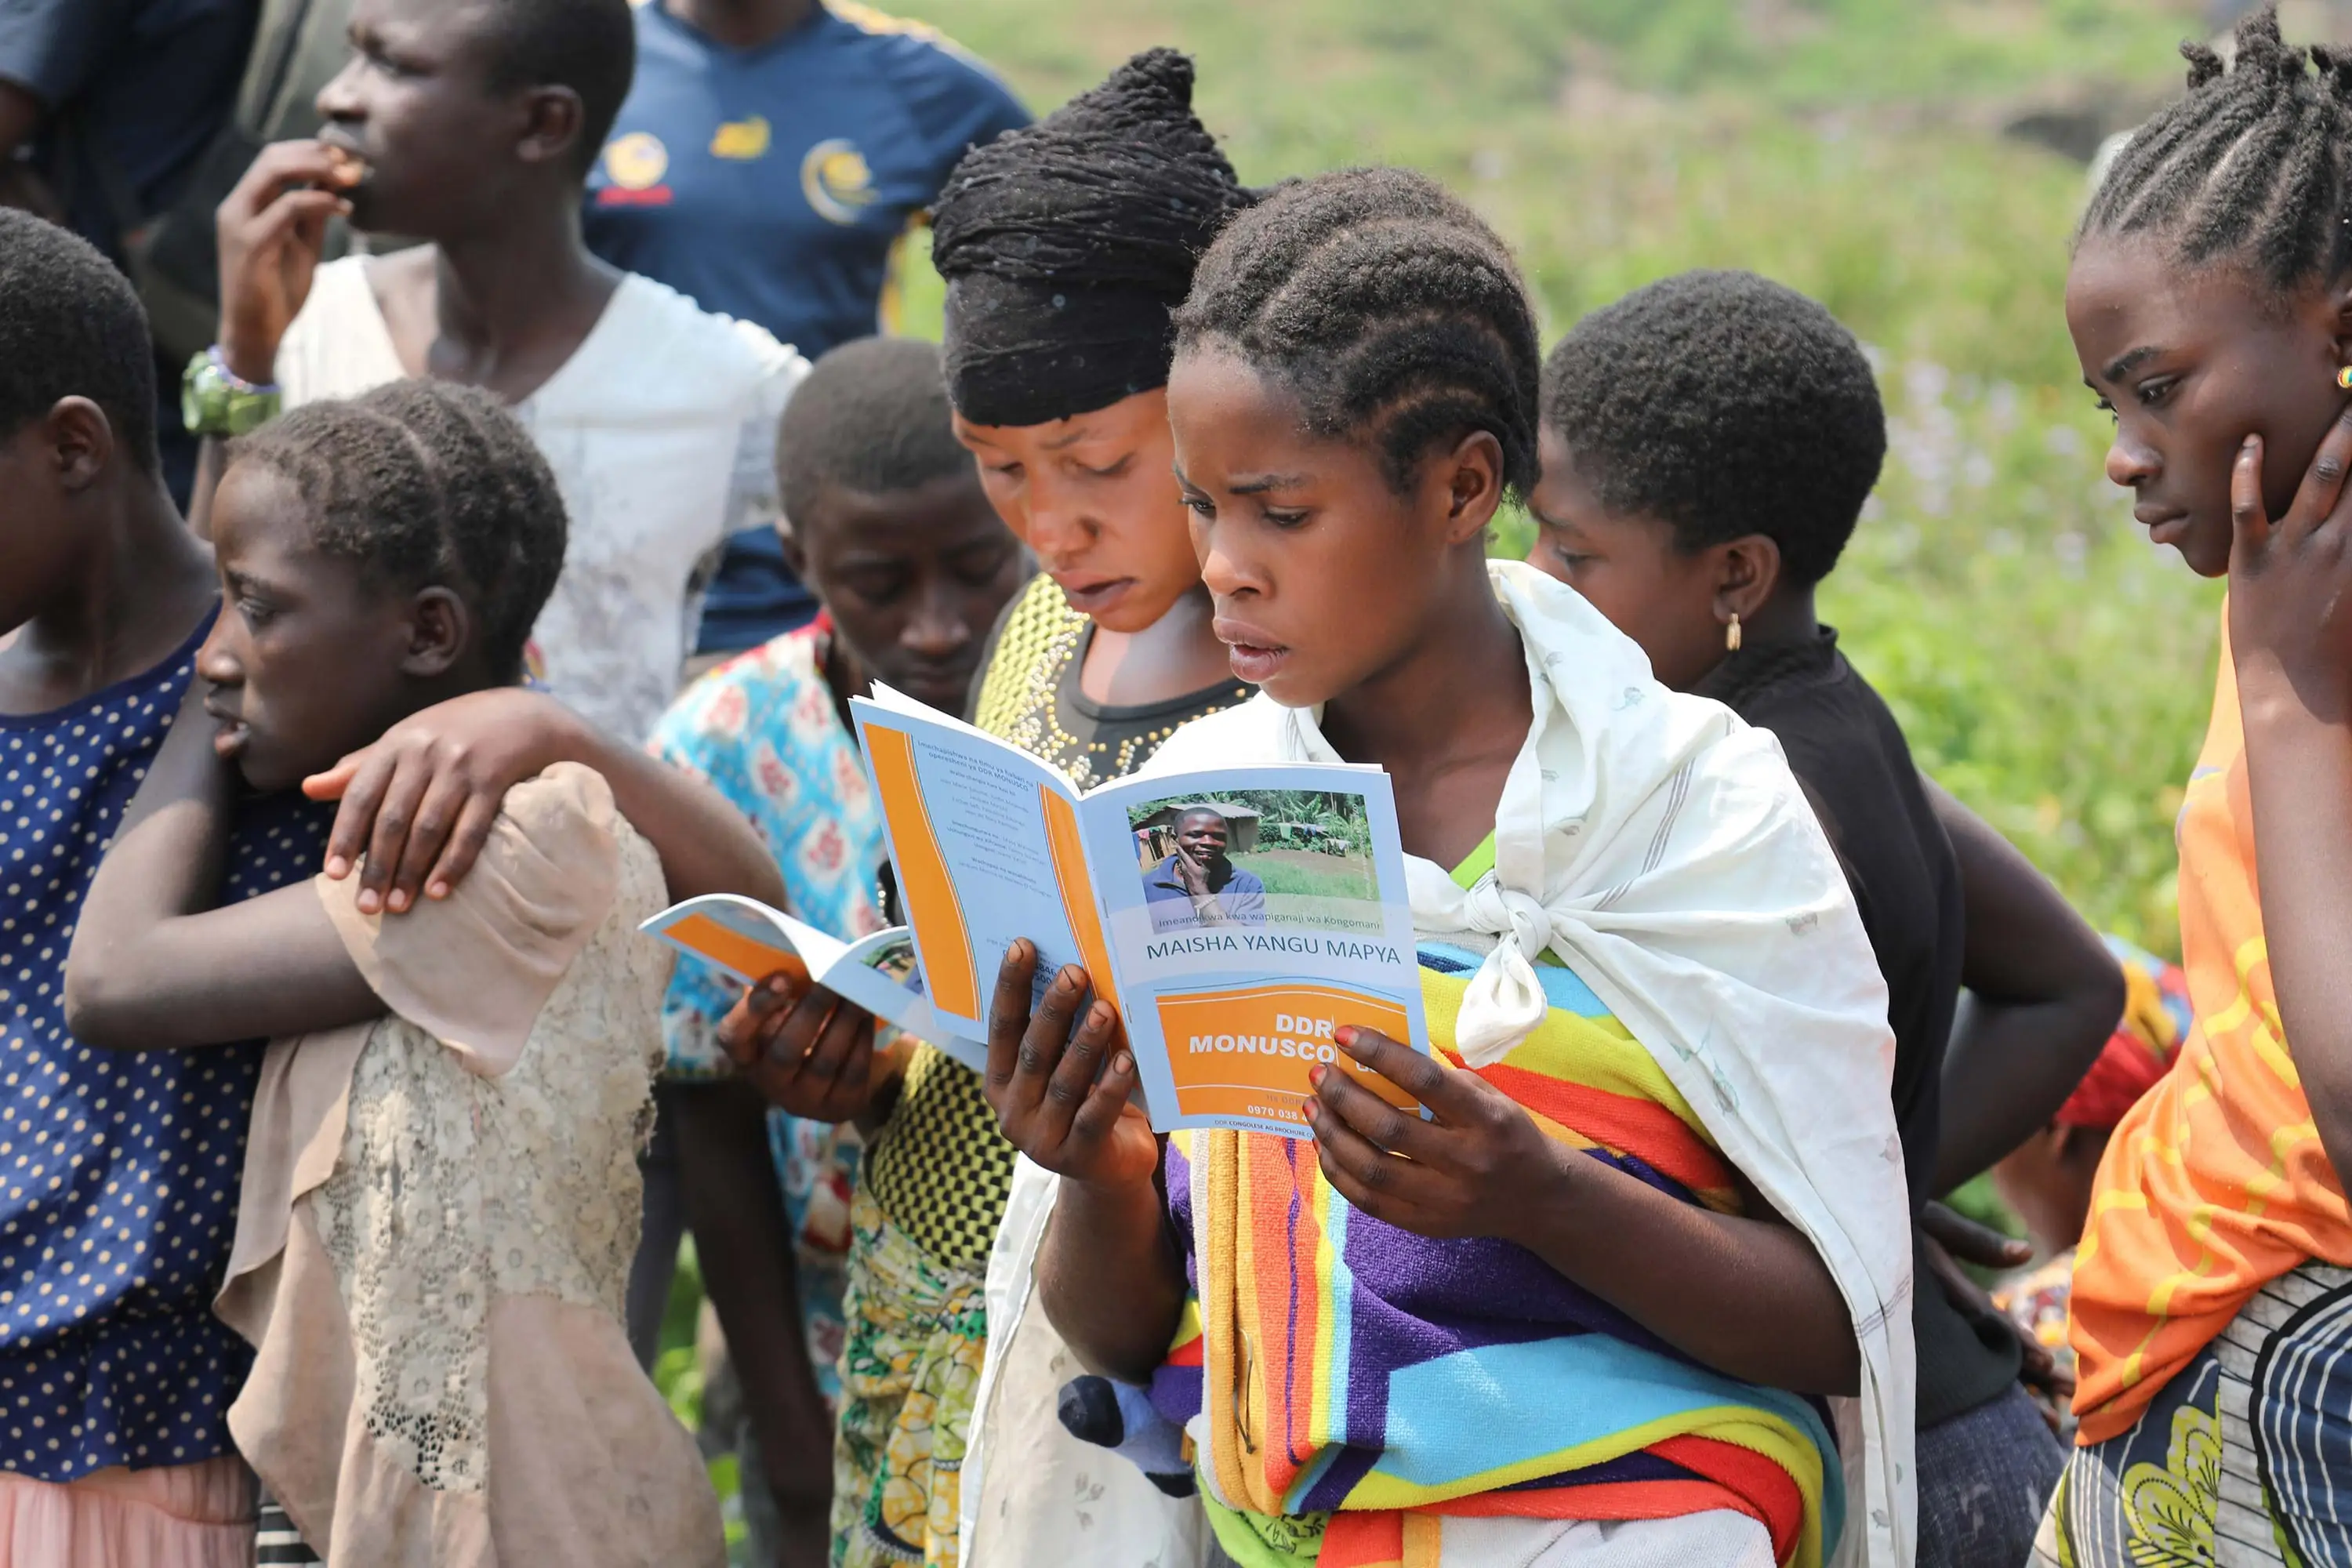 Black children stand outside. One of the children is reading a book.